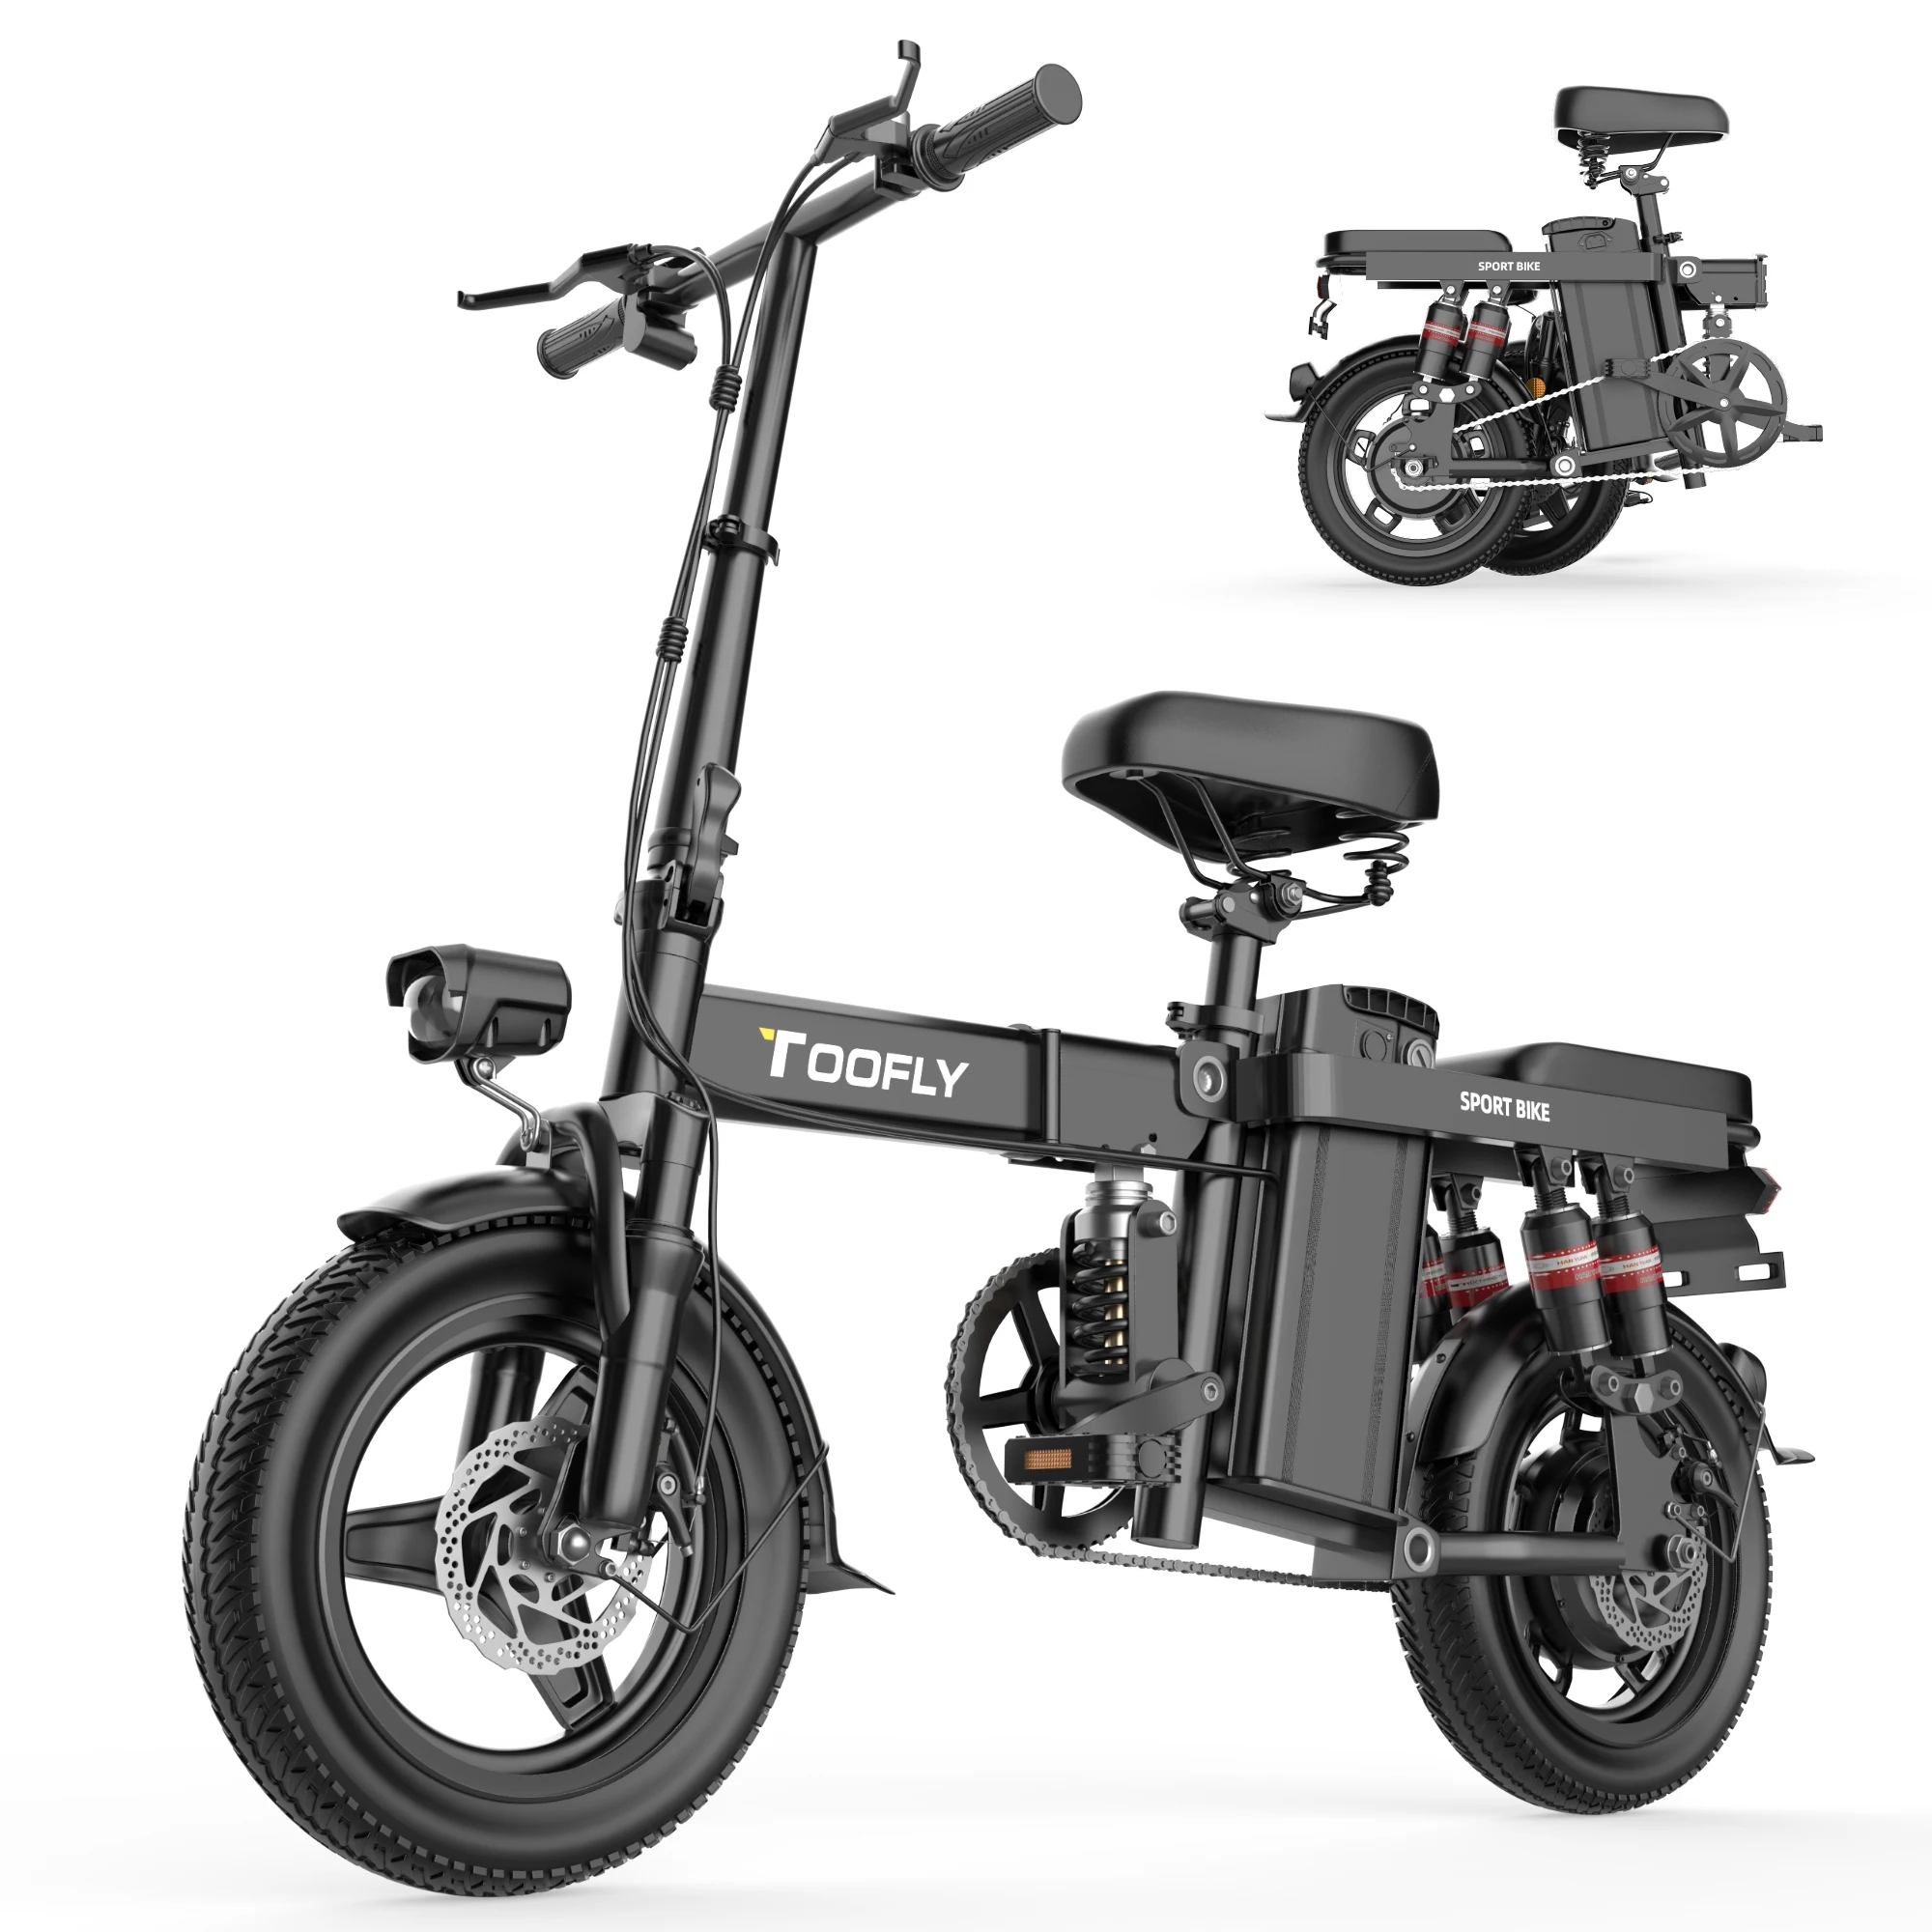 

2 wheel cheap 500w 48v electric moped bike with Foot pedal assistance